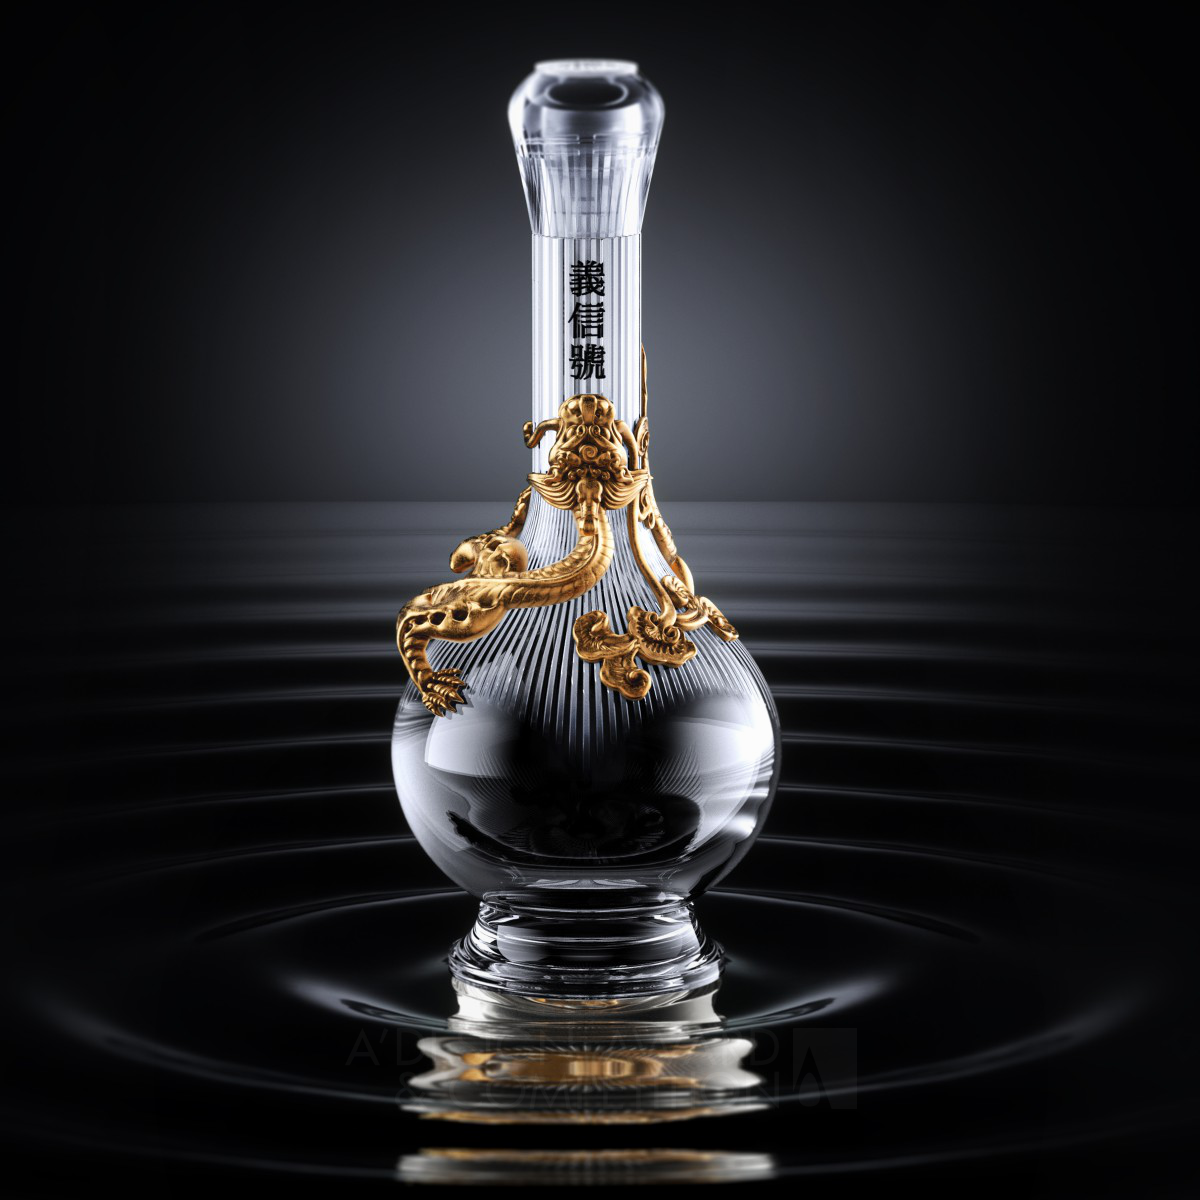 TIGER PAN wins Golden at the prestigious A' Packaging Design Award with Yi Xin Distillation Chinese Highend Spirits.